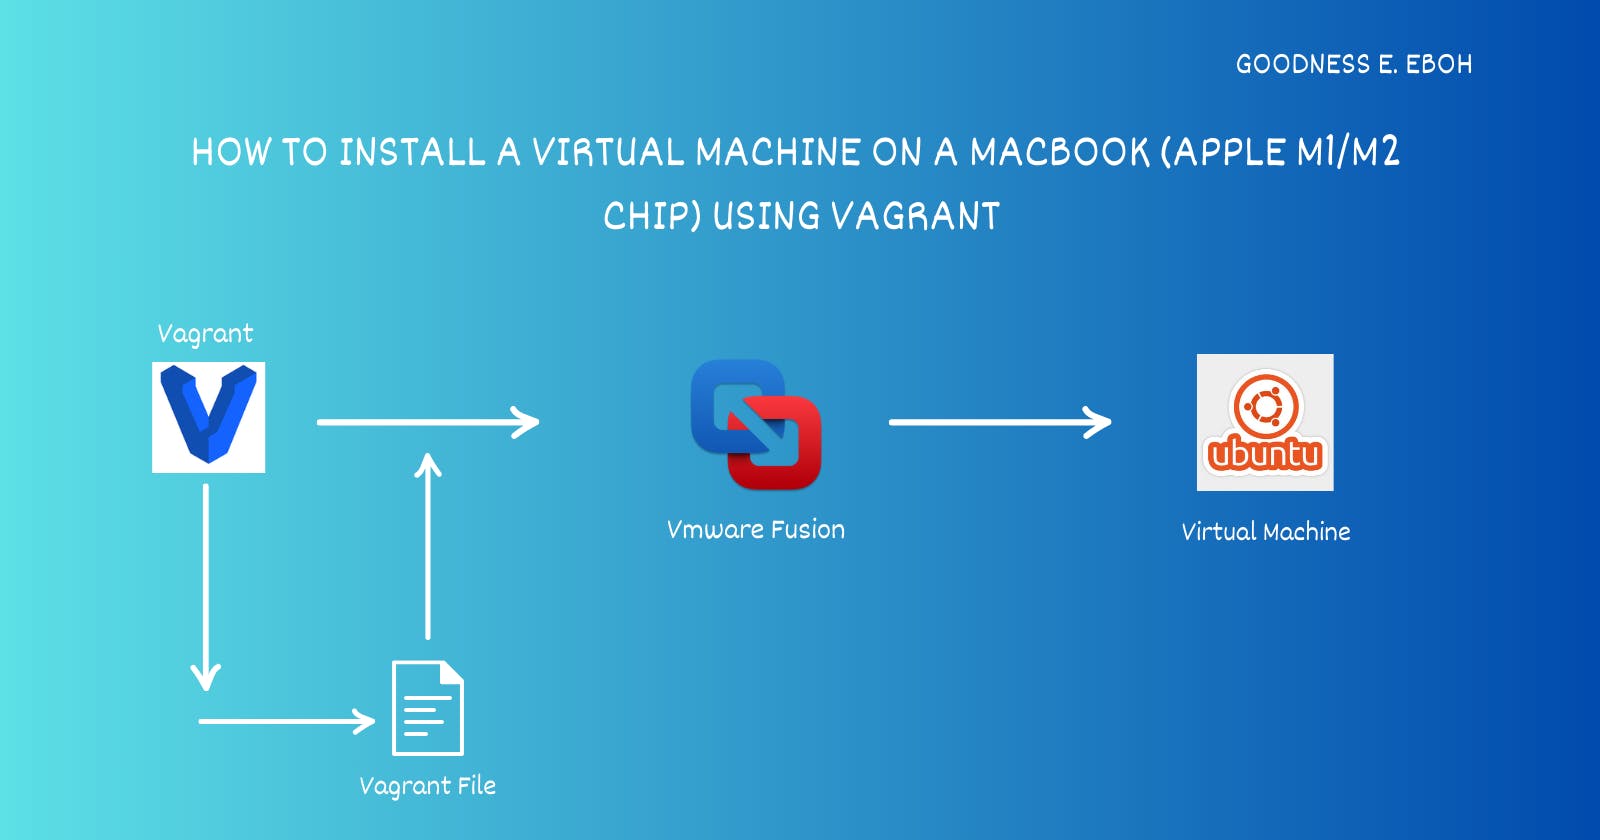 How To Install A Virtual Machine On A Macbook (apple M1/m2 
chip) Using Vagrant